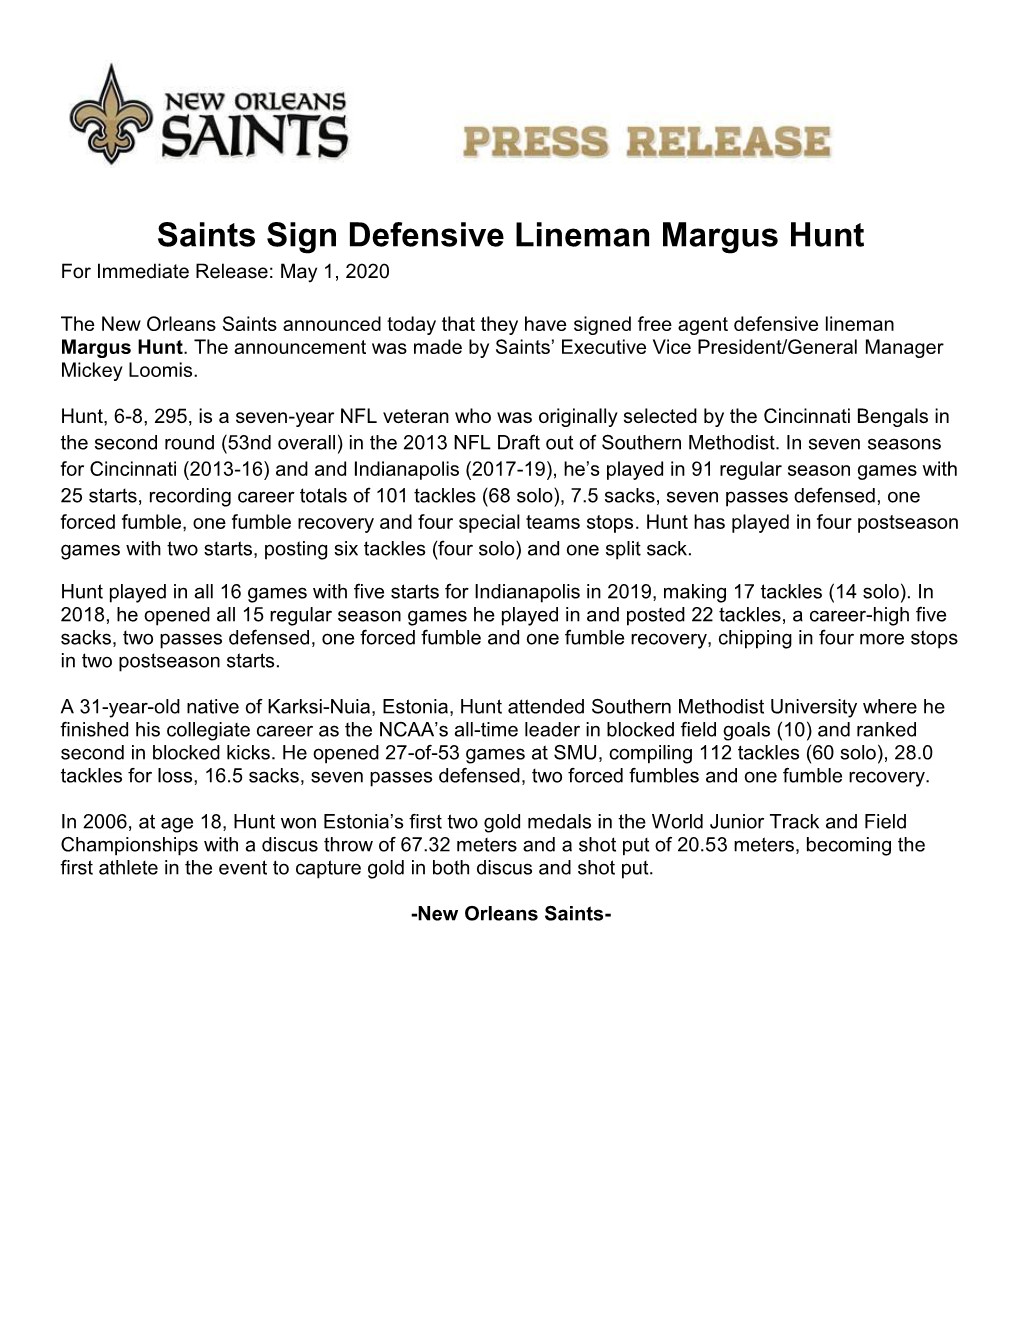 Saints Sign Defensive Lineman Margus Hunt for Immediate Release: May 1, 2020